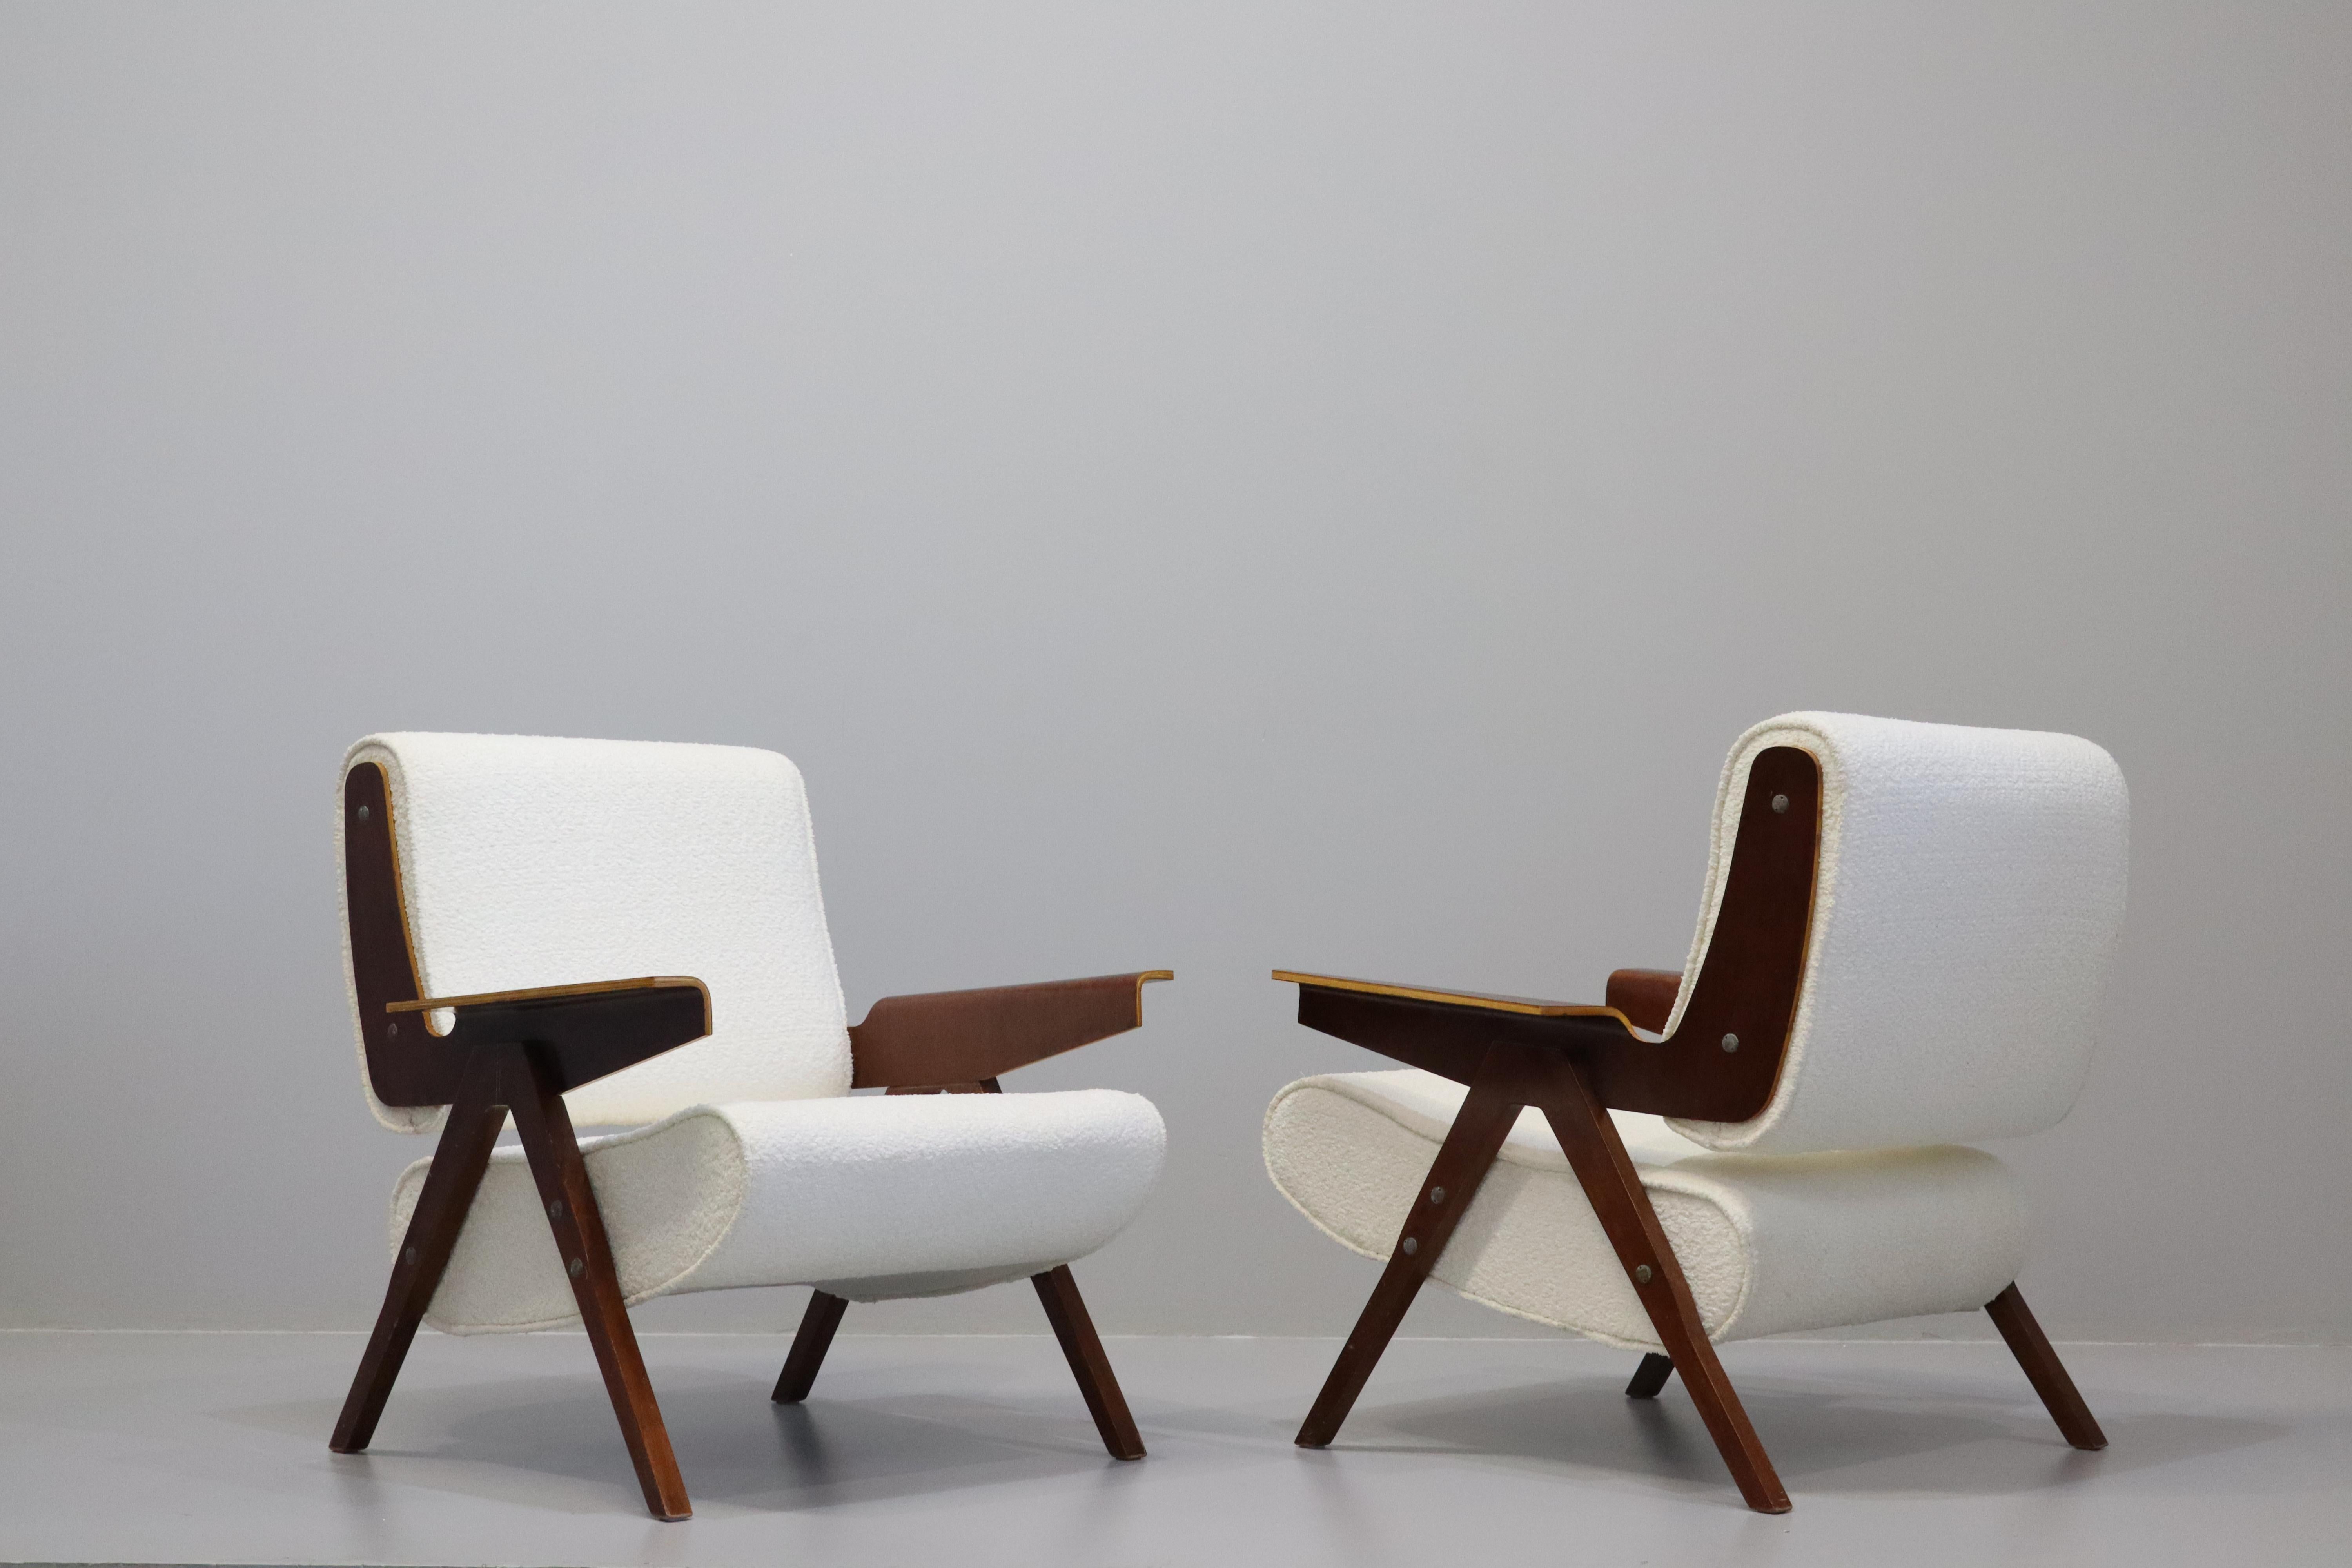 Pair Of Gianfranco Frattini Model 831 Lounge Chairs For Cassina, 1950s For Sale 1